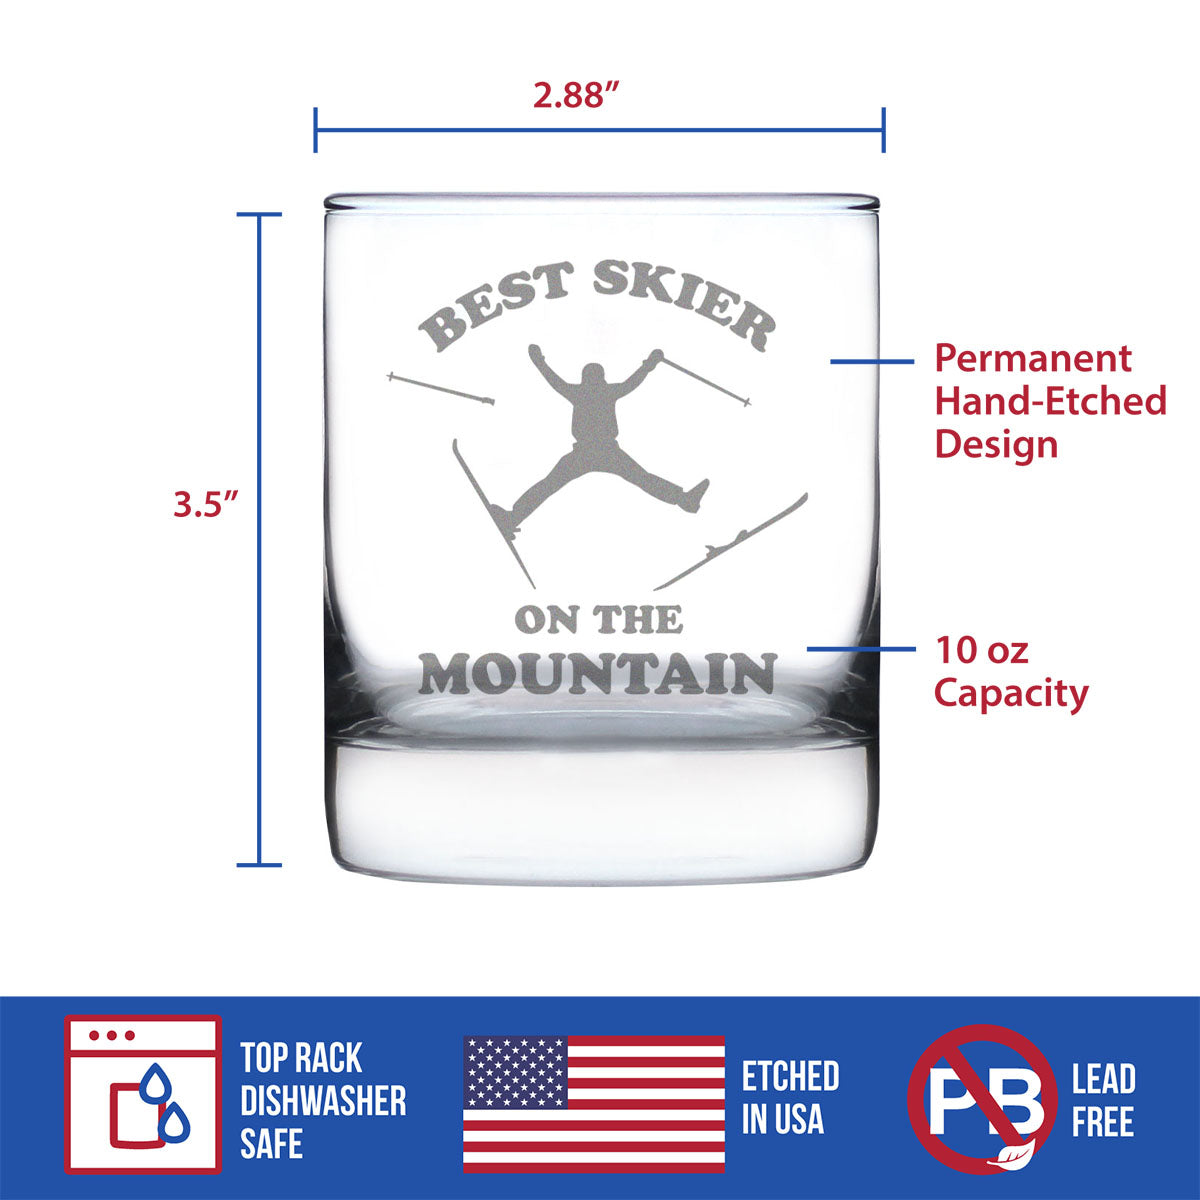 Best Skier - Whiskey Rocks Glass - Unique Skiing Themed Decor and Gifts for Mountain Lovers - 10.25 Oz Glasses